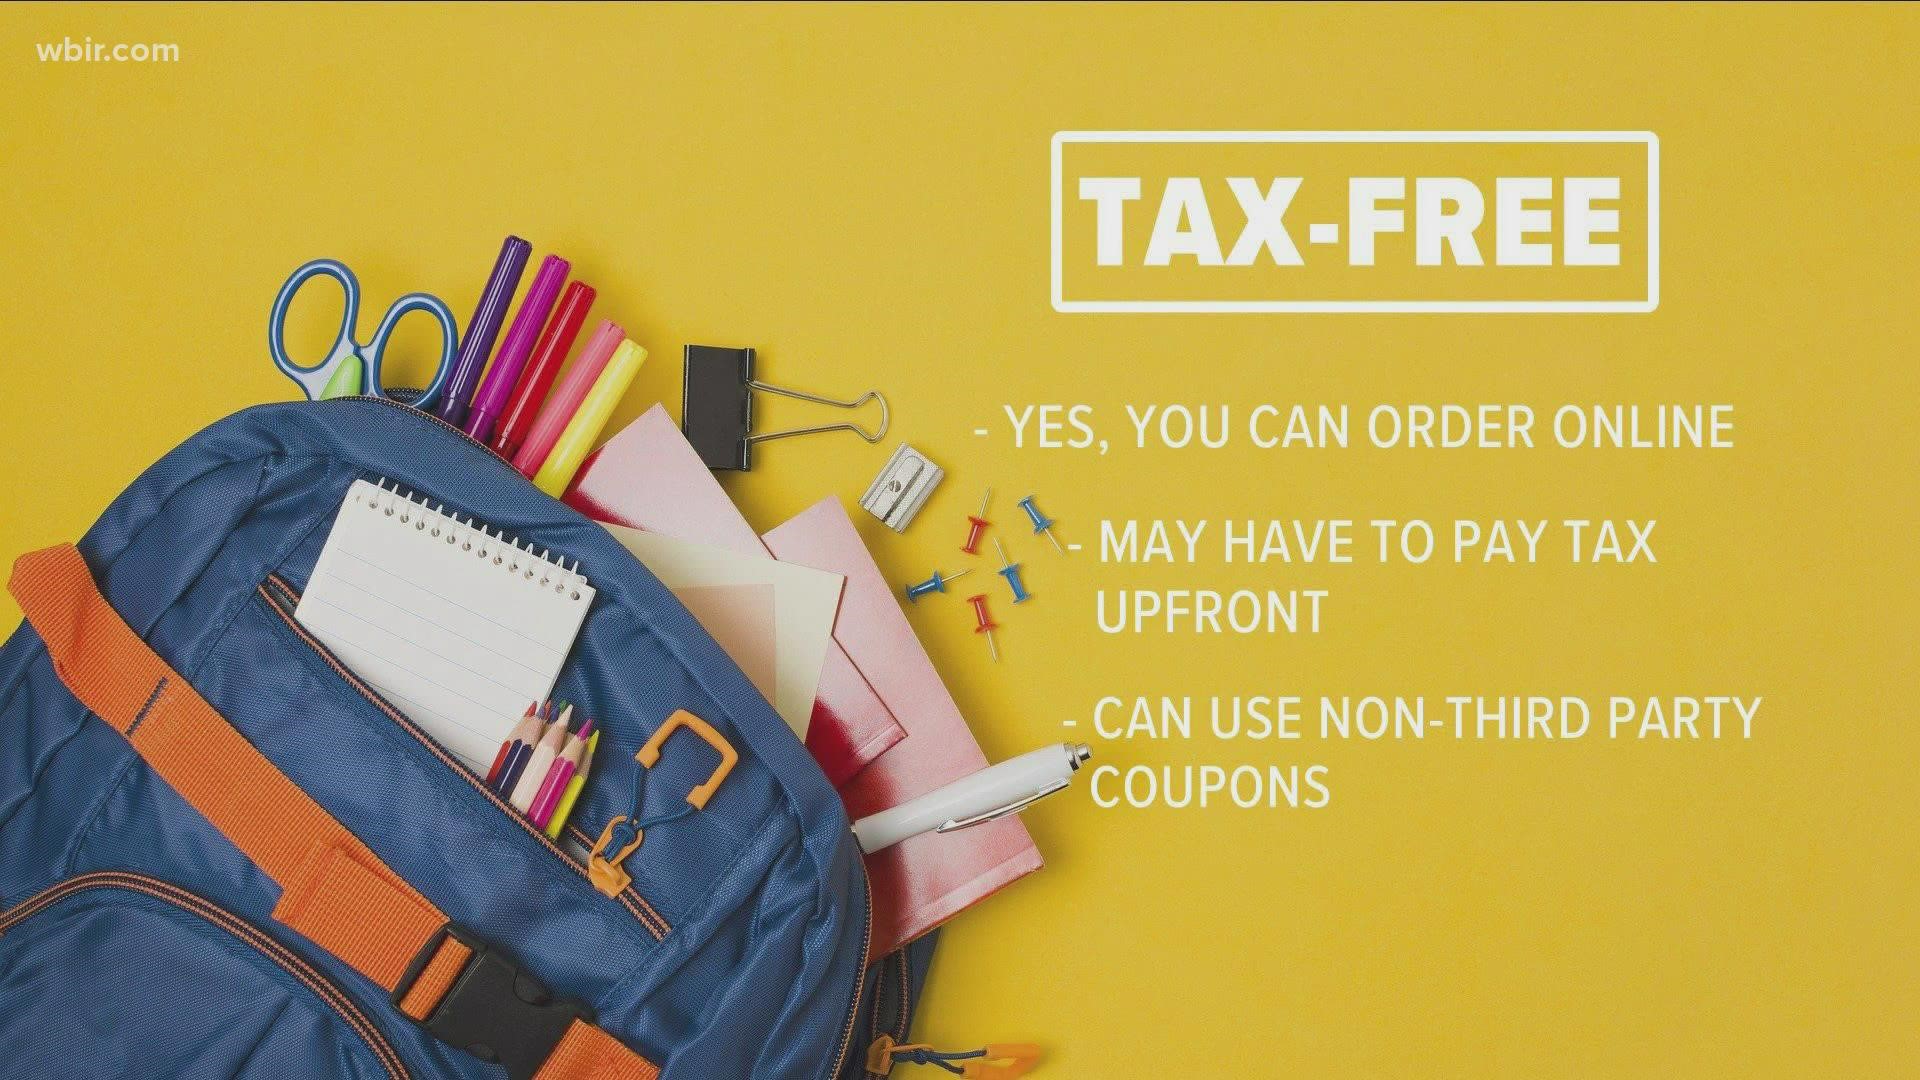 It's officially tax-free weekend!